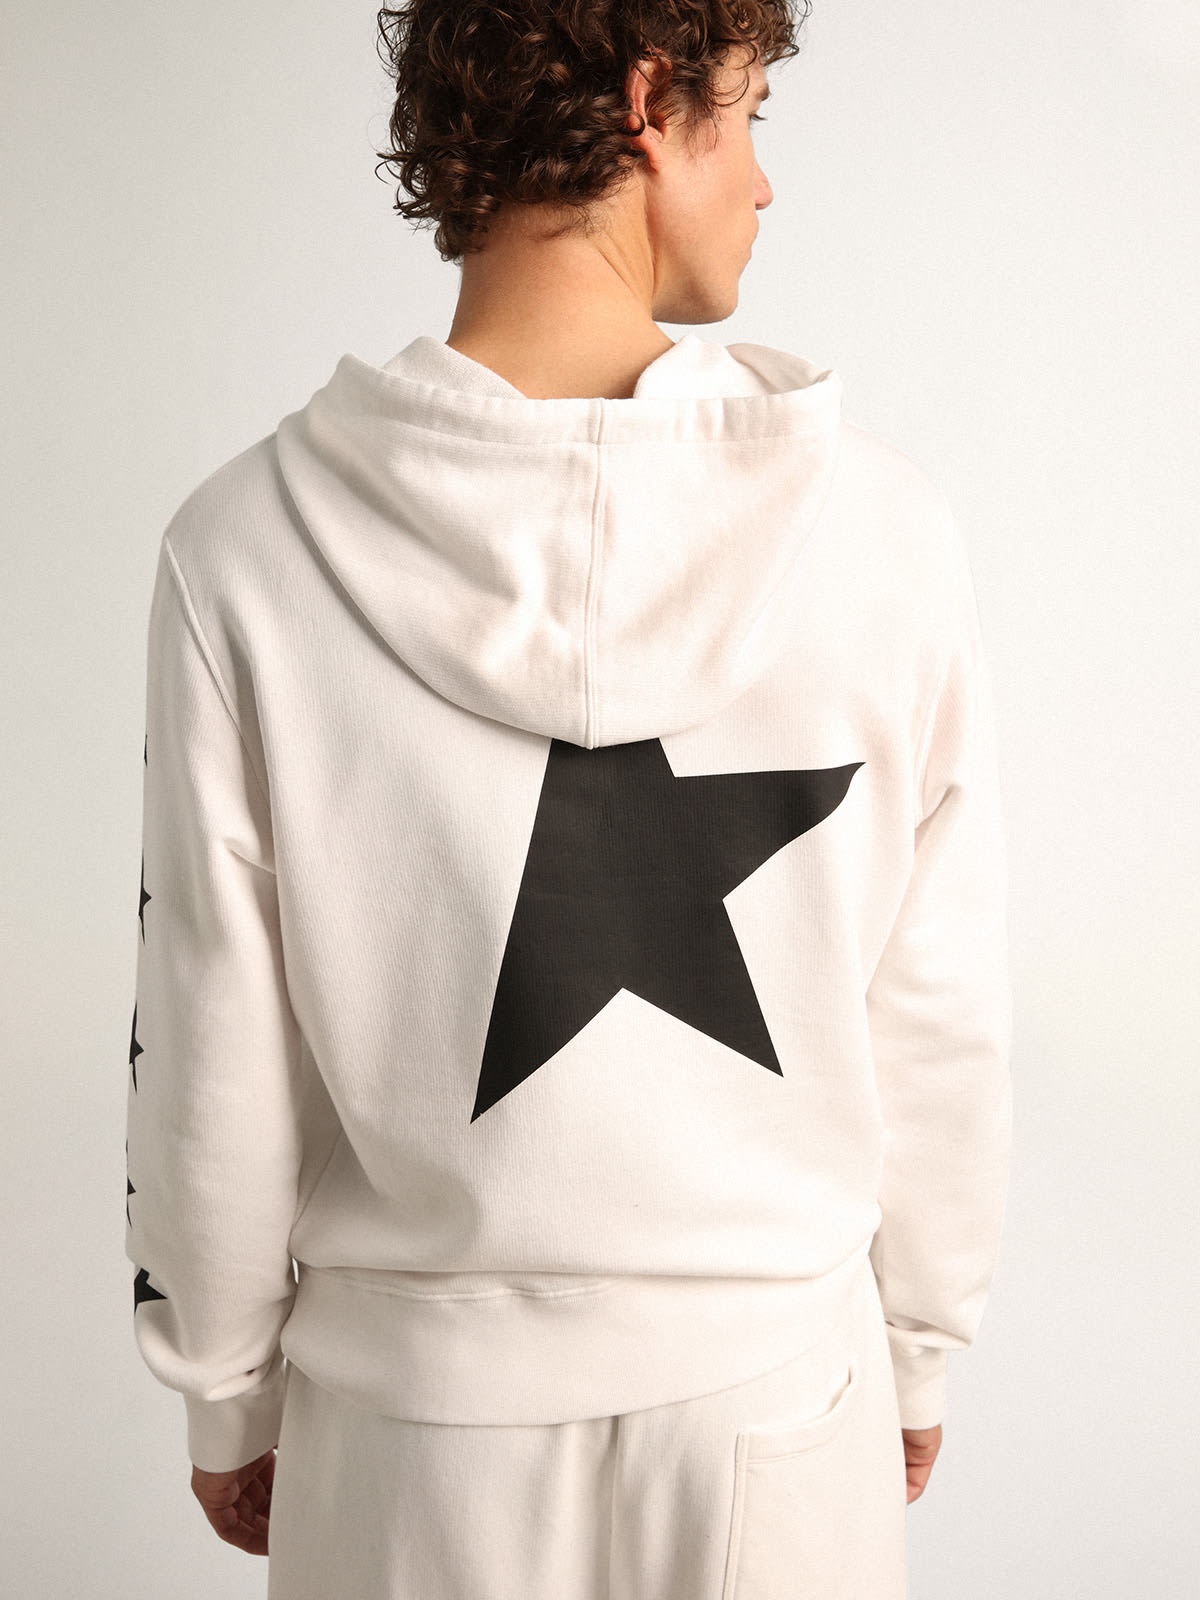 Alighiero Star Collection hooded sweatshirt in vintage white with contrasting black stars - 2